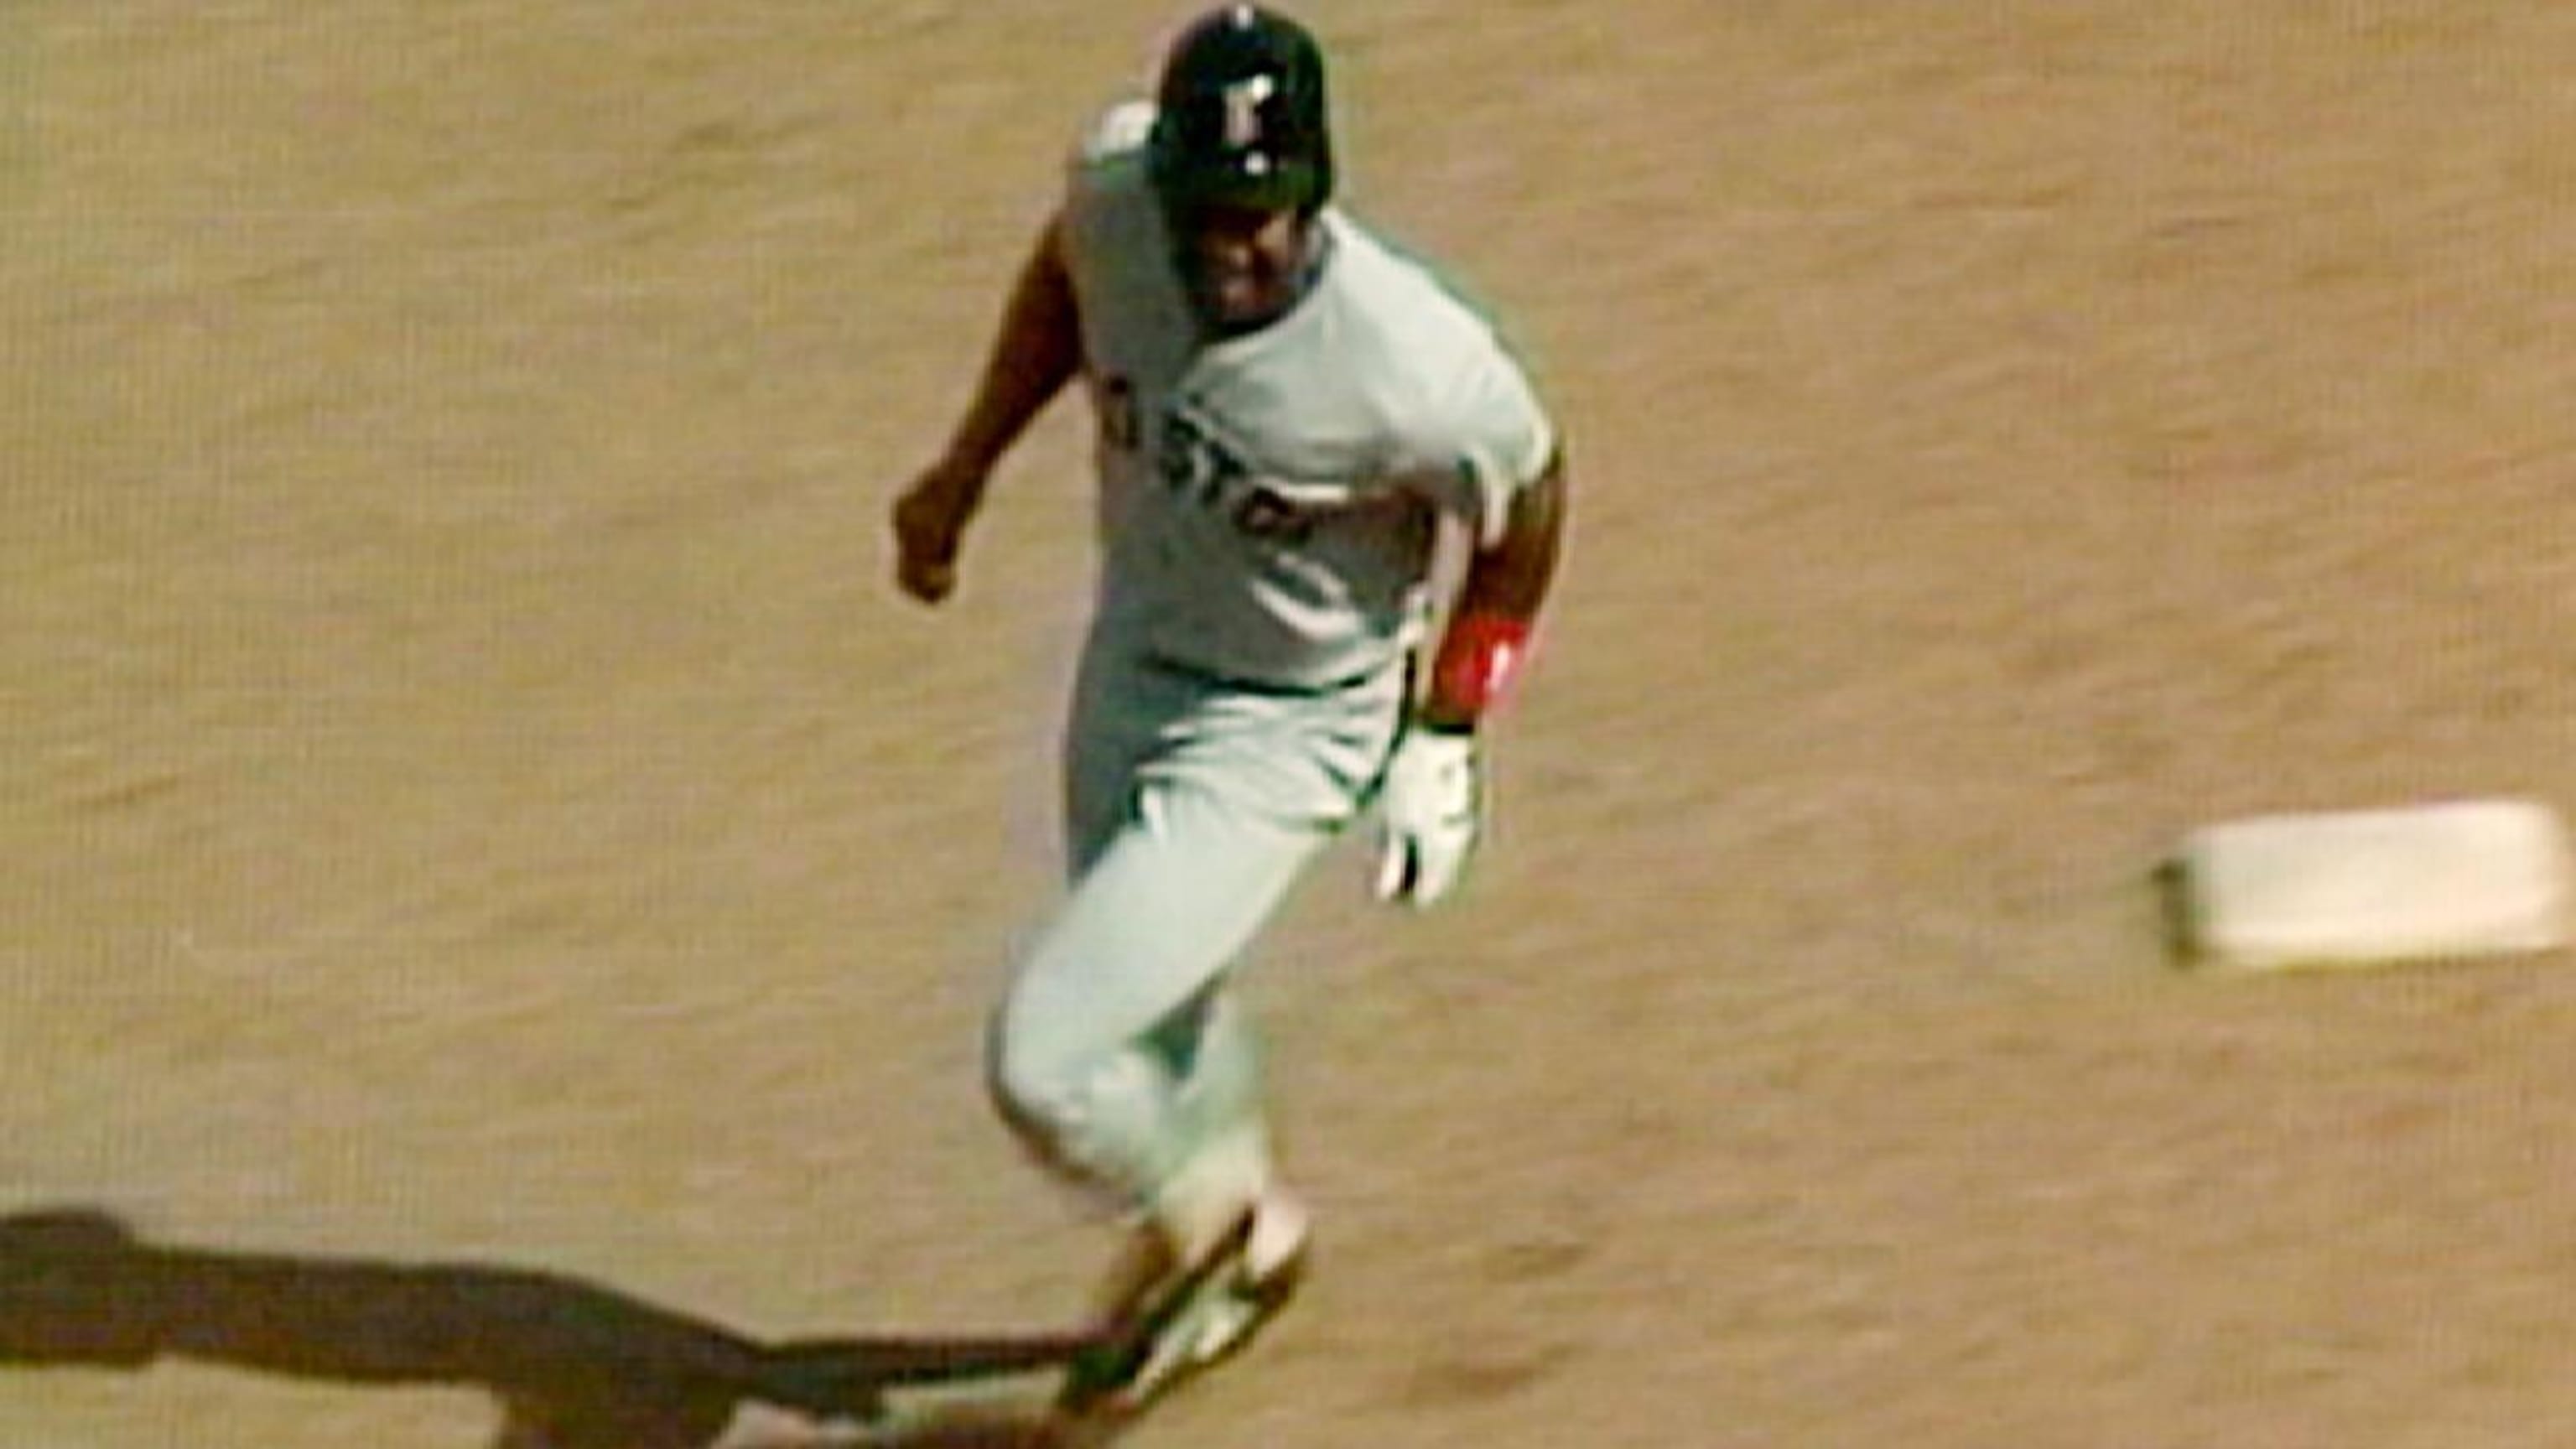 Bambino's Curse lives! Bill Buckner error allows Mets to rally in Game 6 of  the 1986 World Series against the Red Sox – New York Daily News